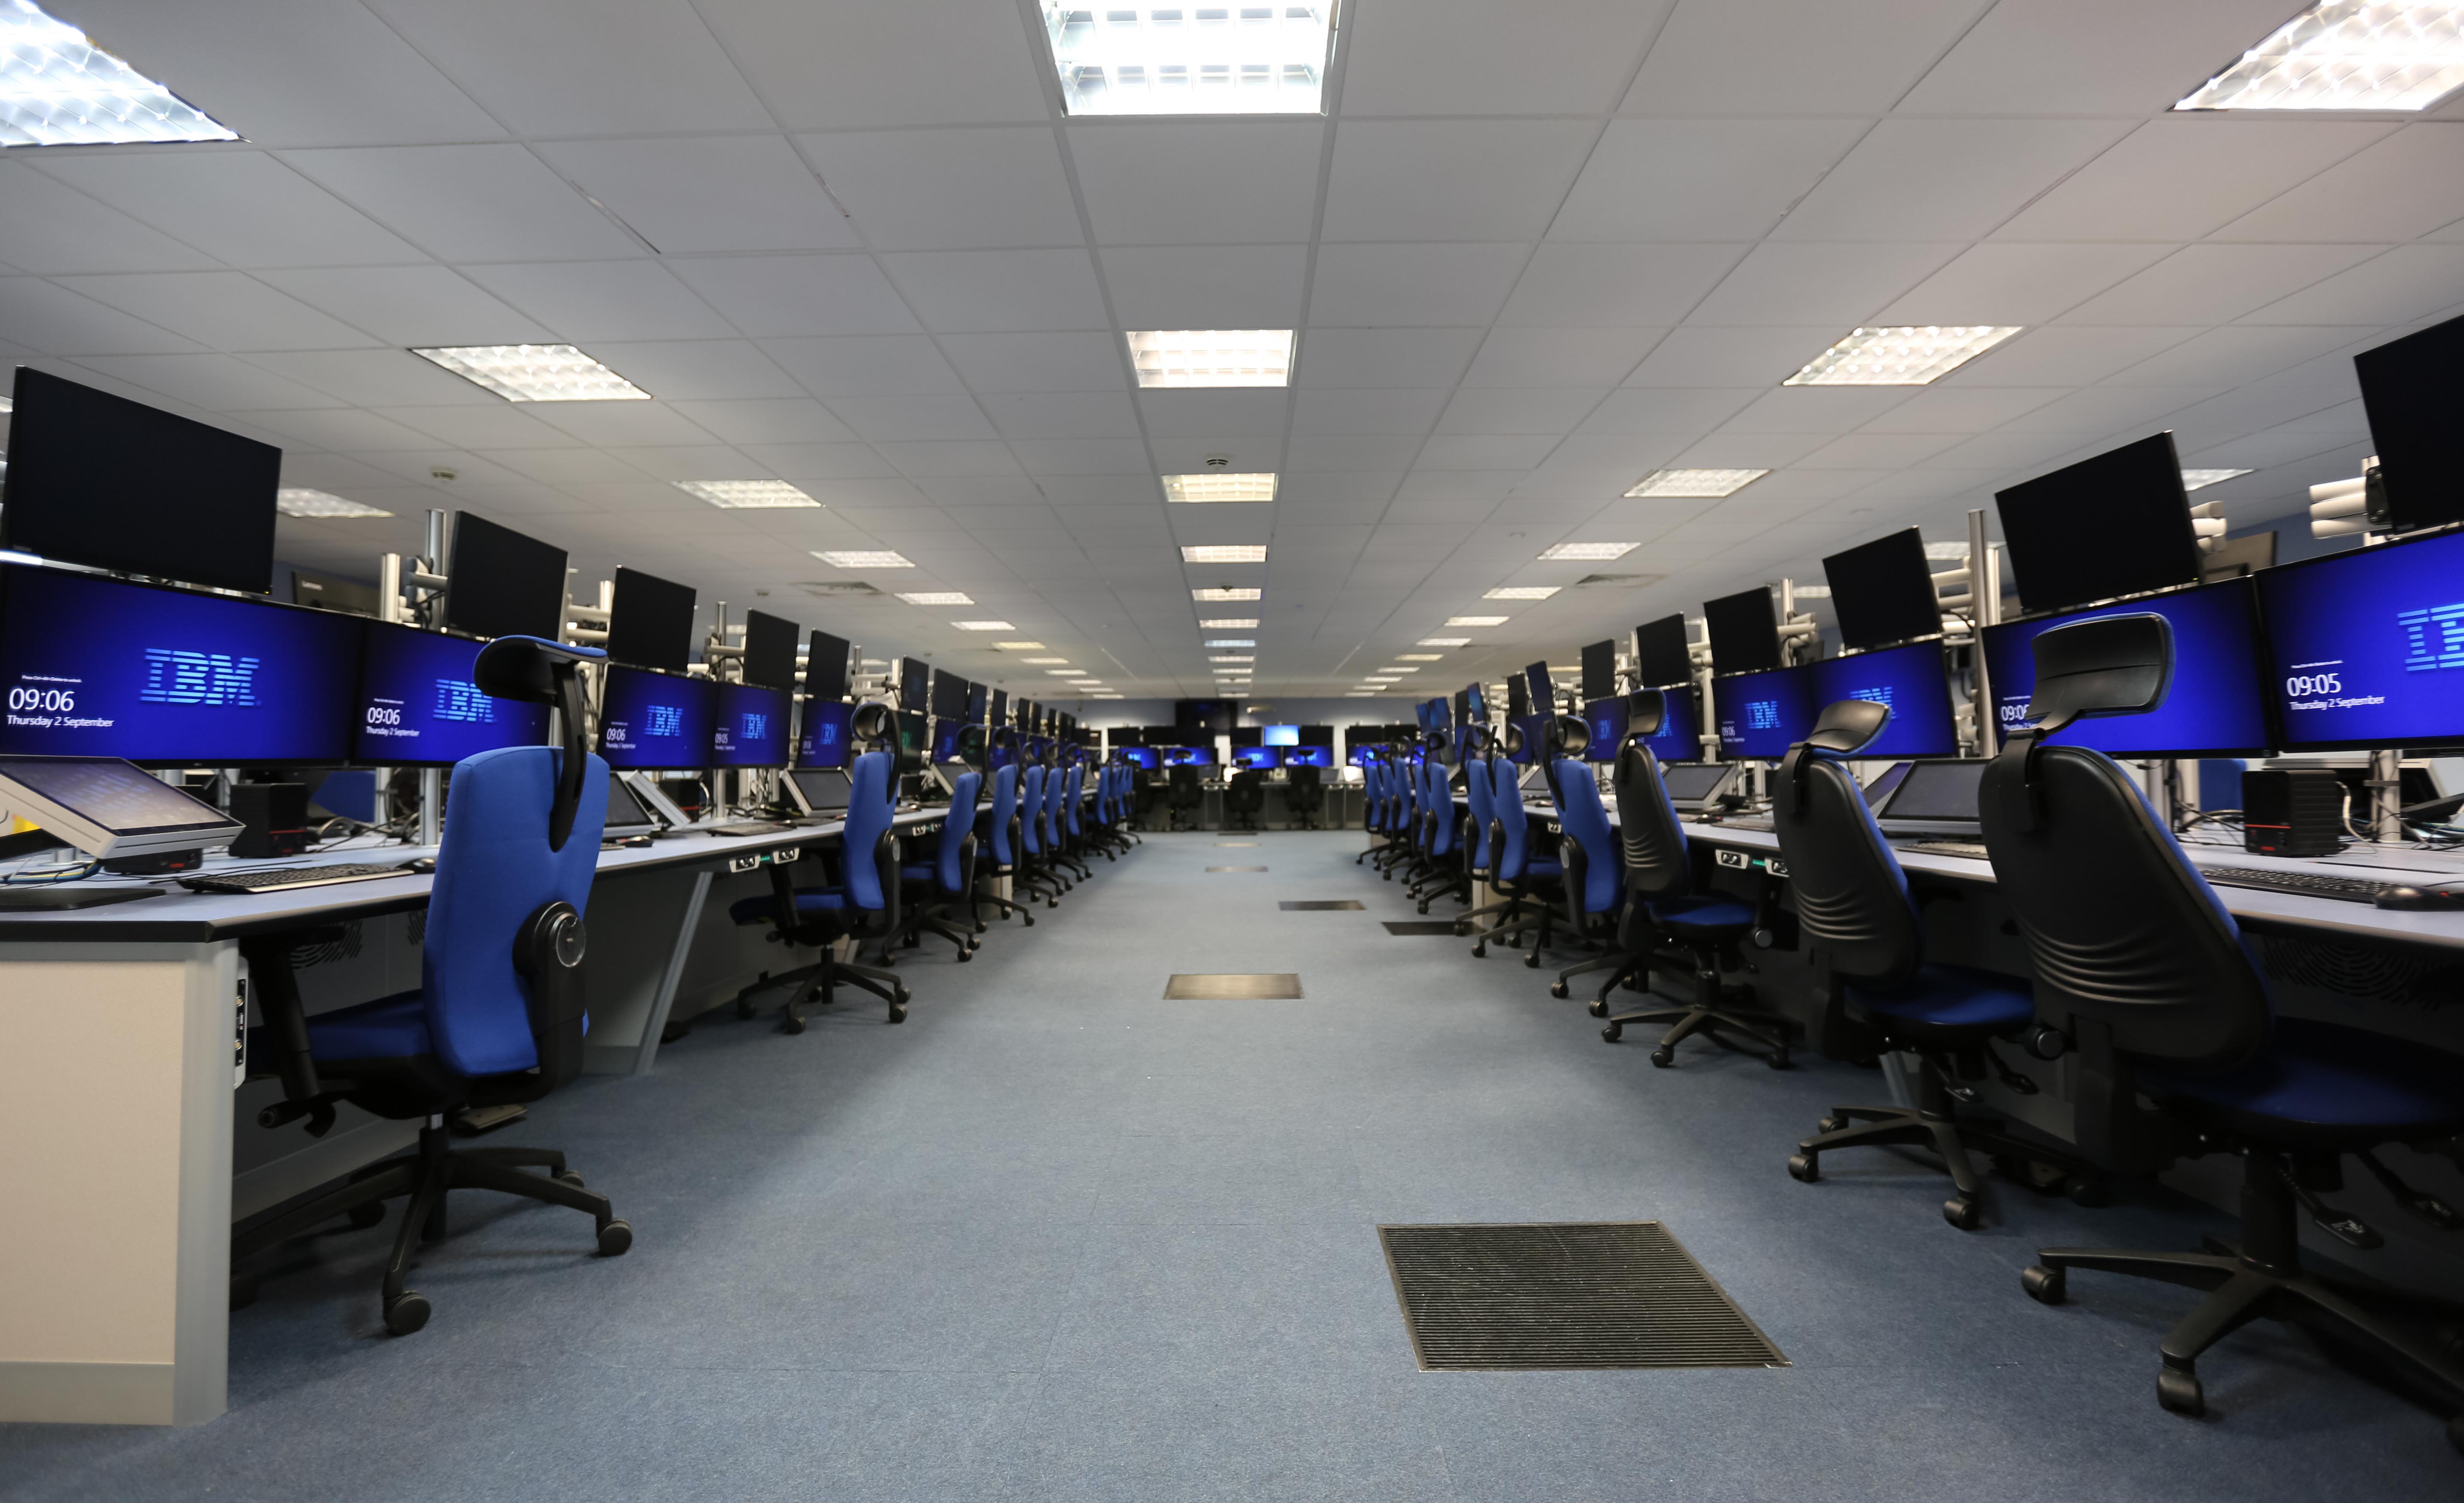 Control room of computers and desks.